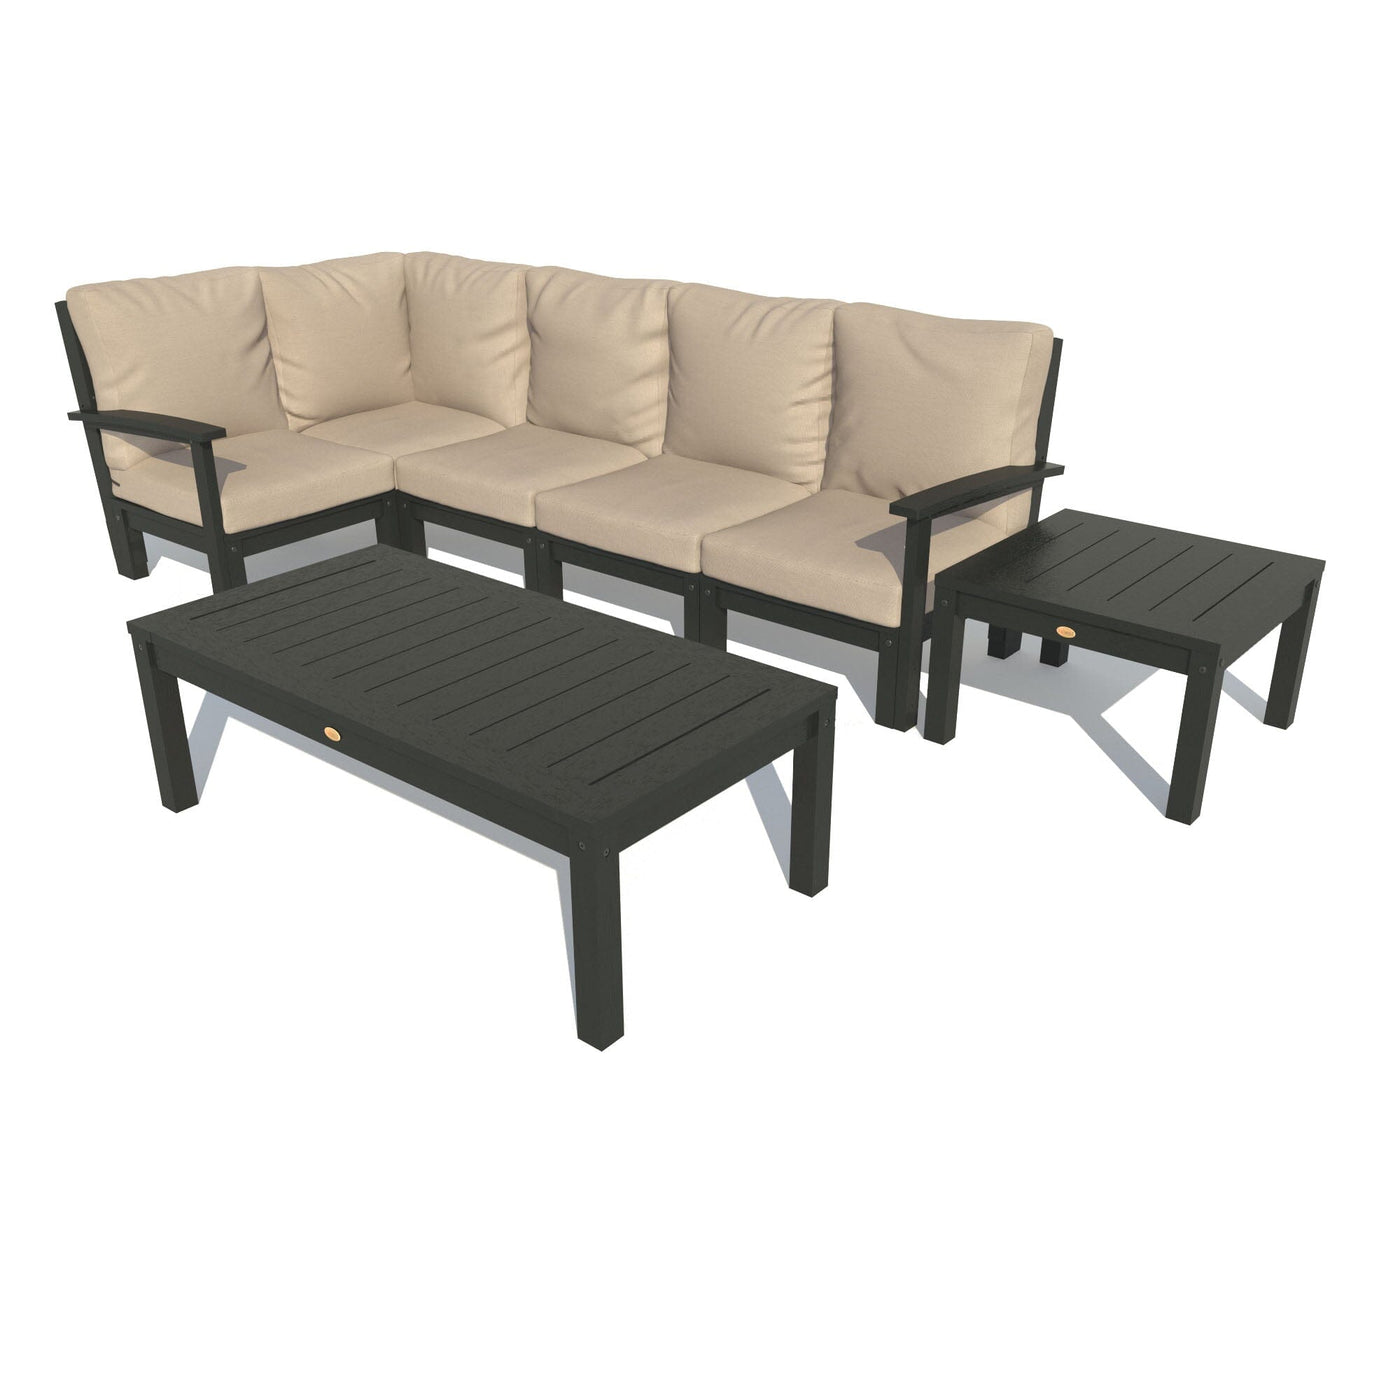 Bespoke Deep Seating: 7 Piece Sectional Set with Conversation and Side Table Deep Seating Highwood USA Driftwood Black 